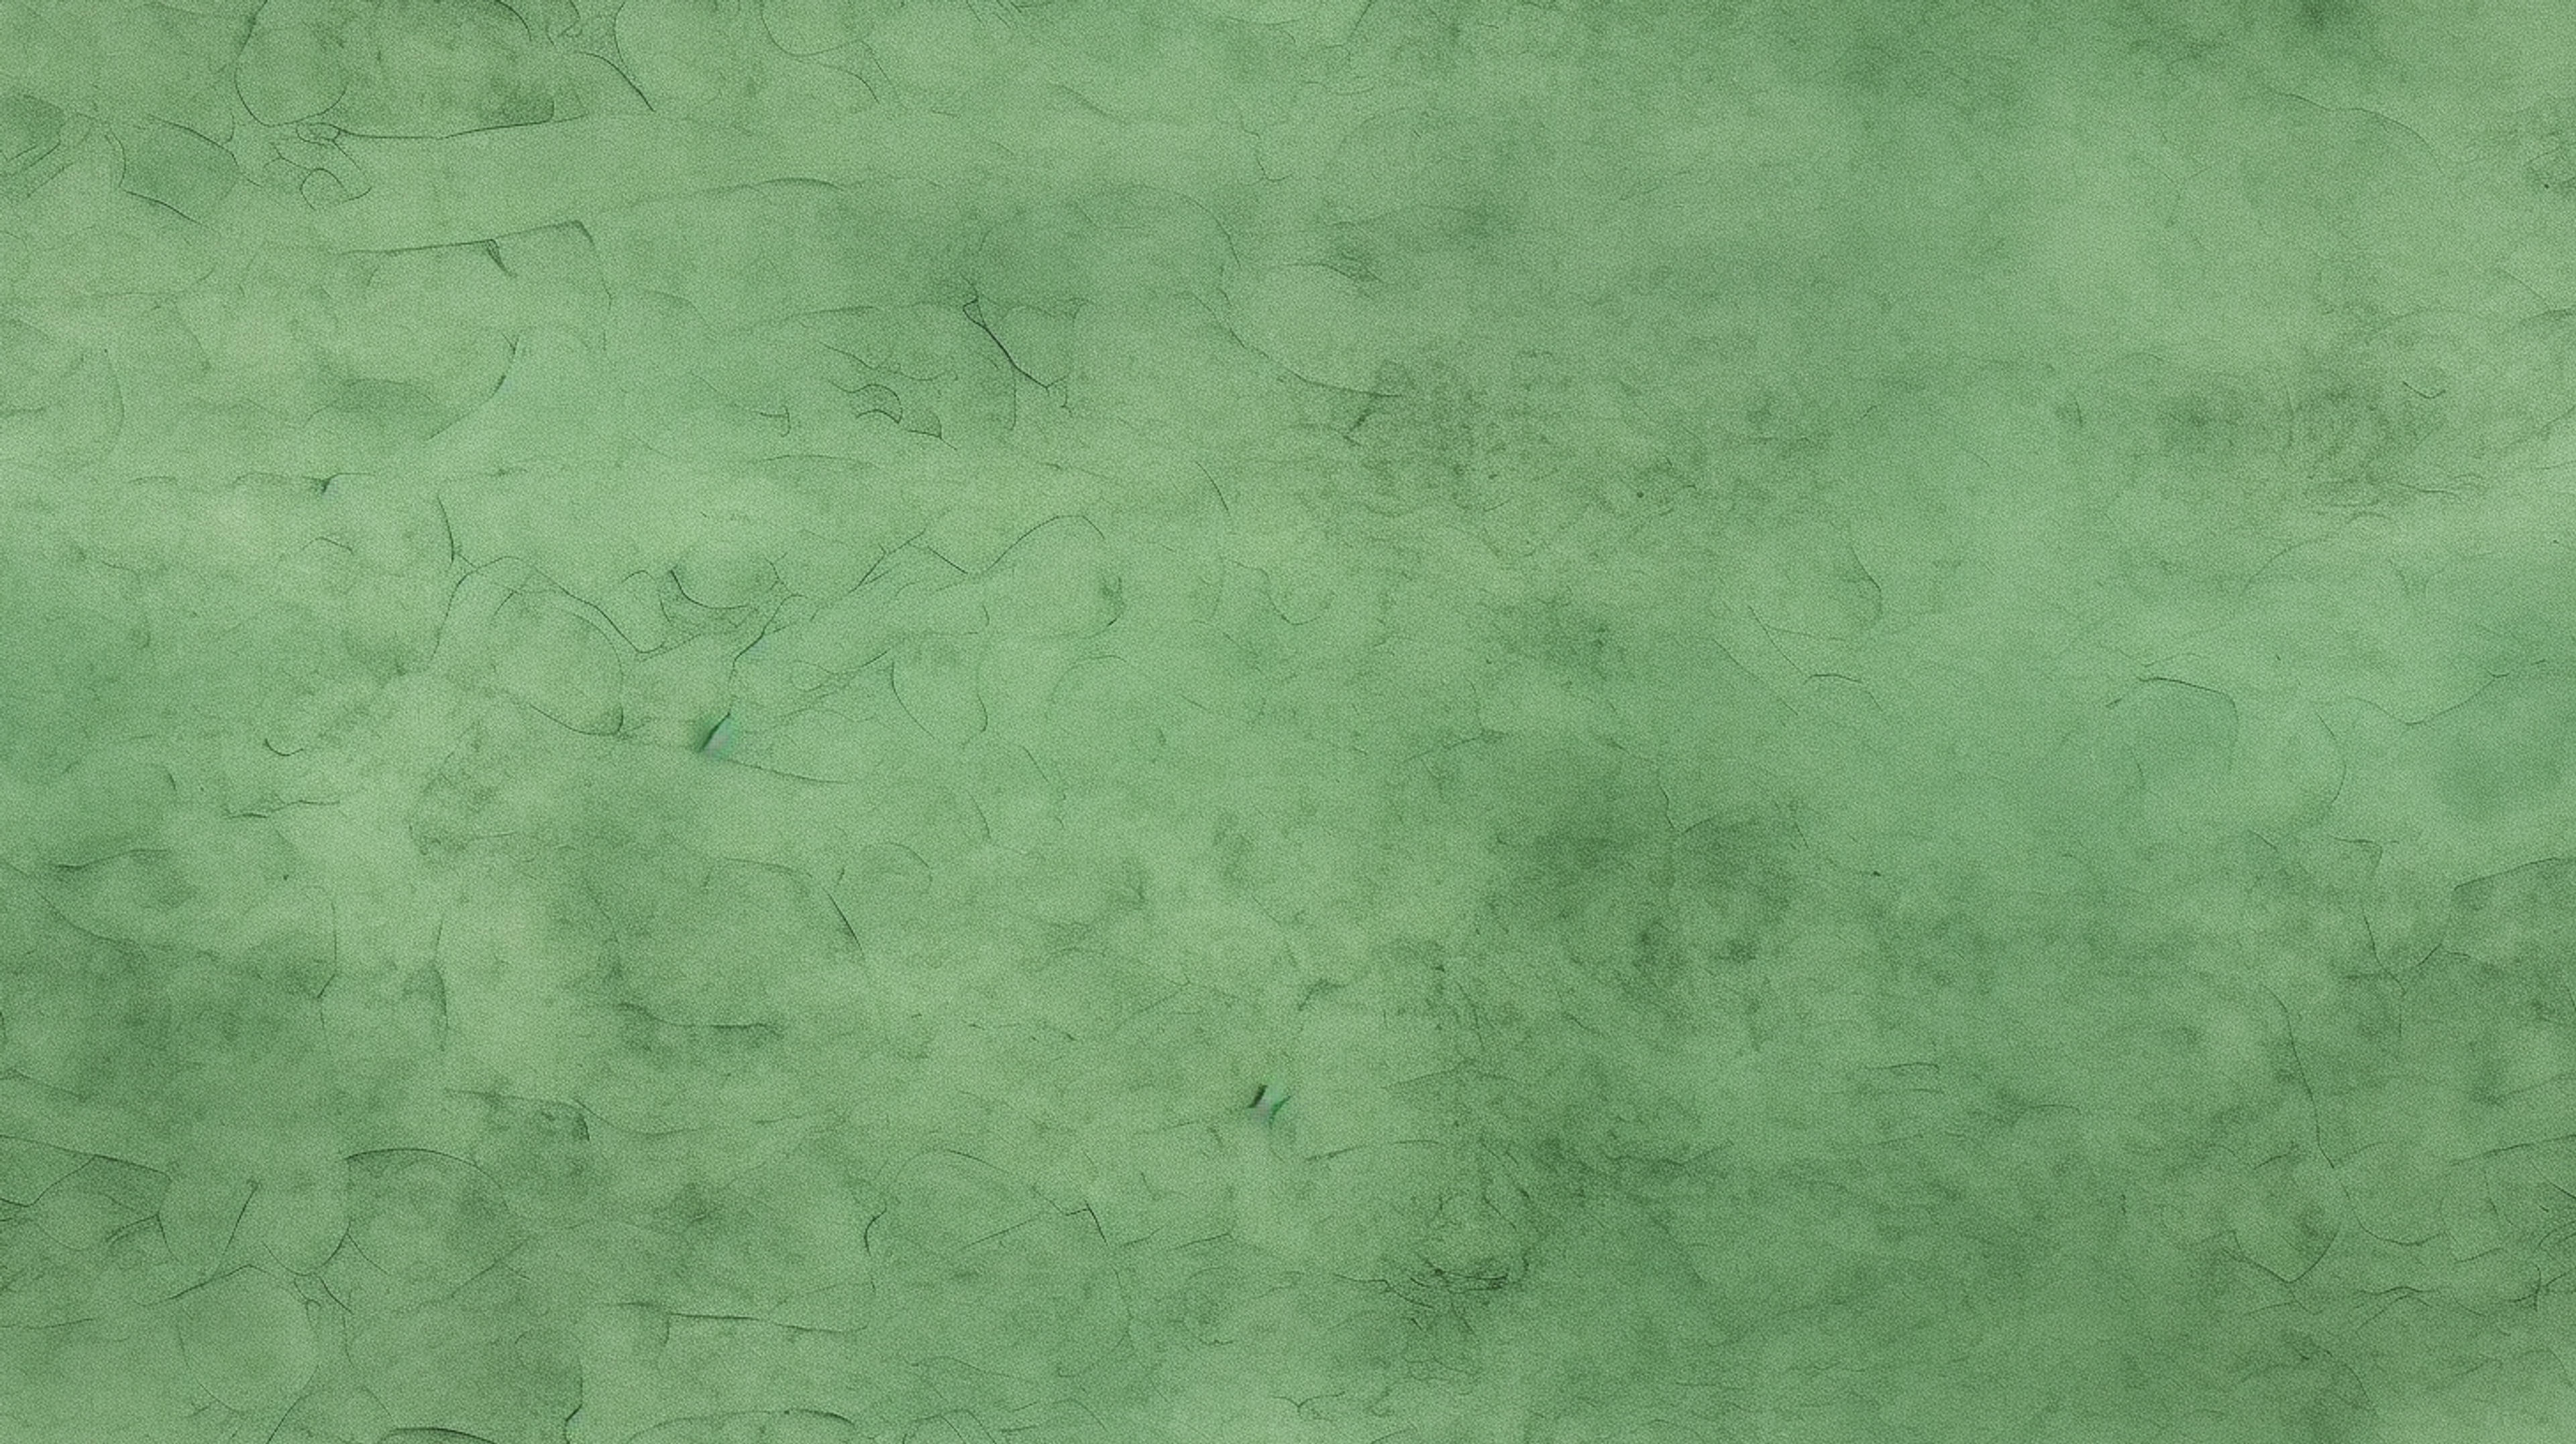 Free Stock Photo of Old grunge green paper  Download Free Images and Free  Illustrations